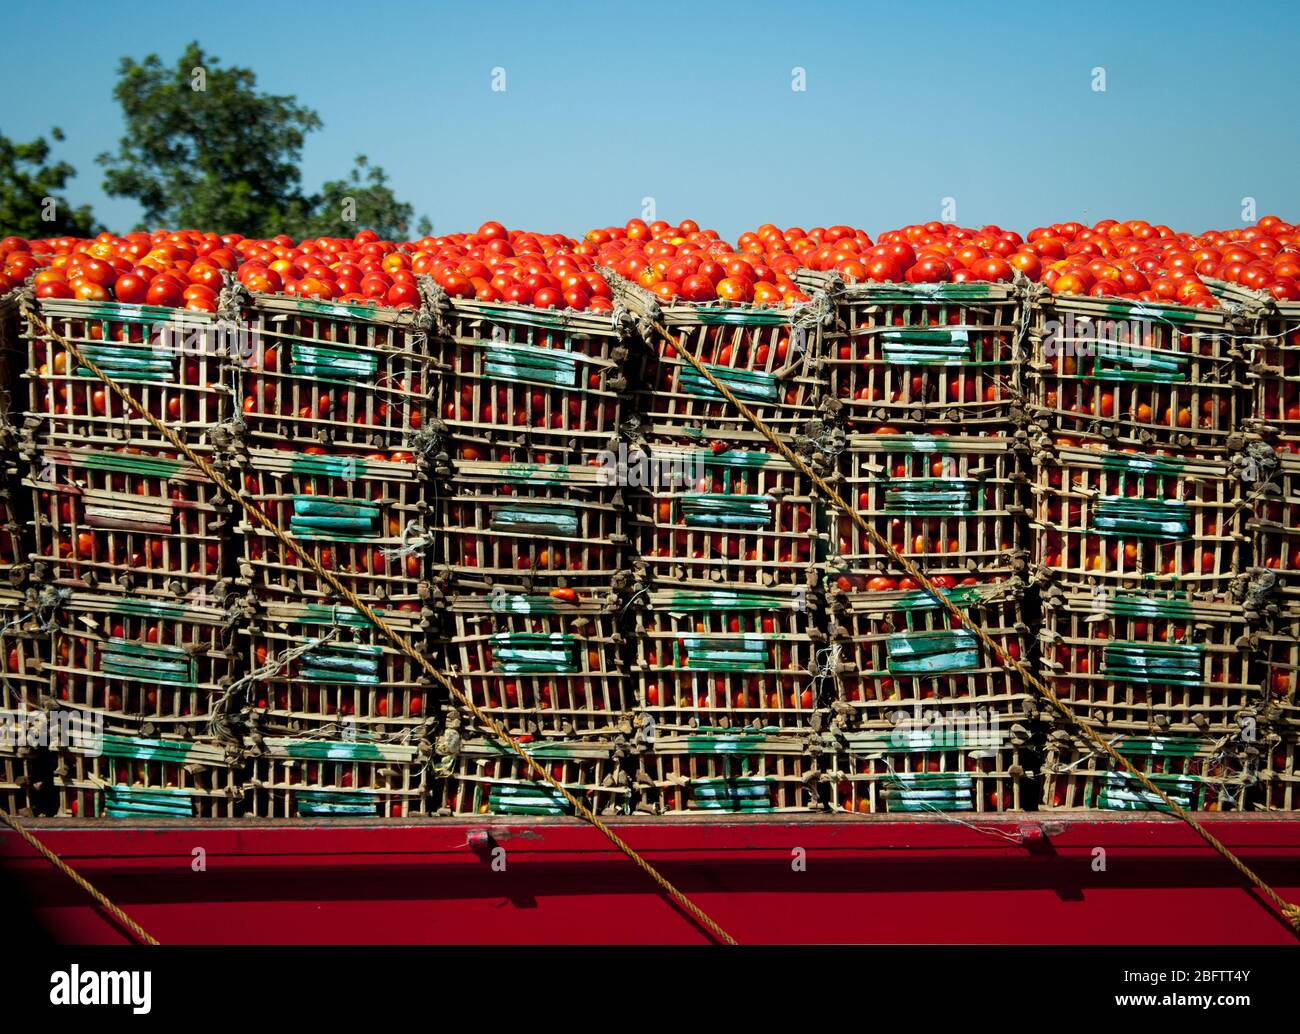 Crates Full of Tomatoes Stacked Up on a Truck Stock Photo